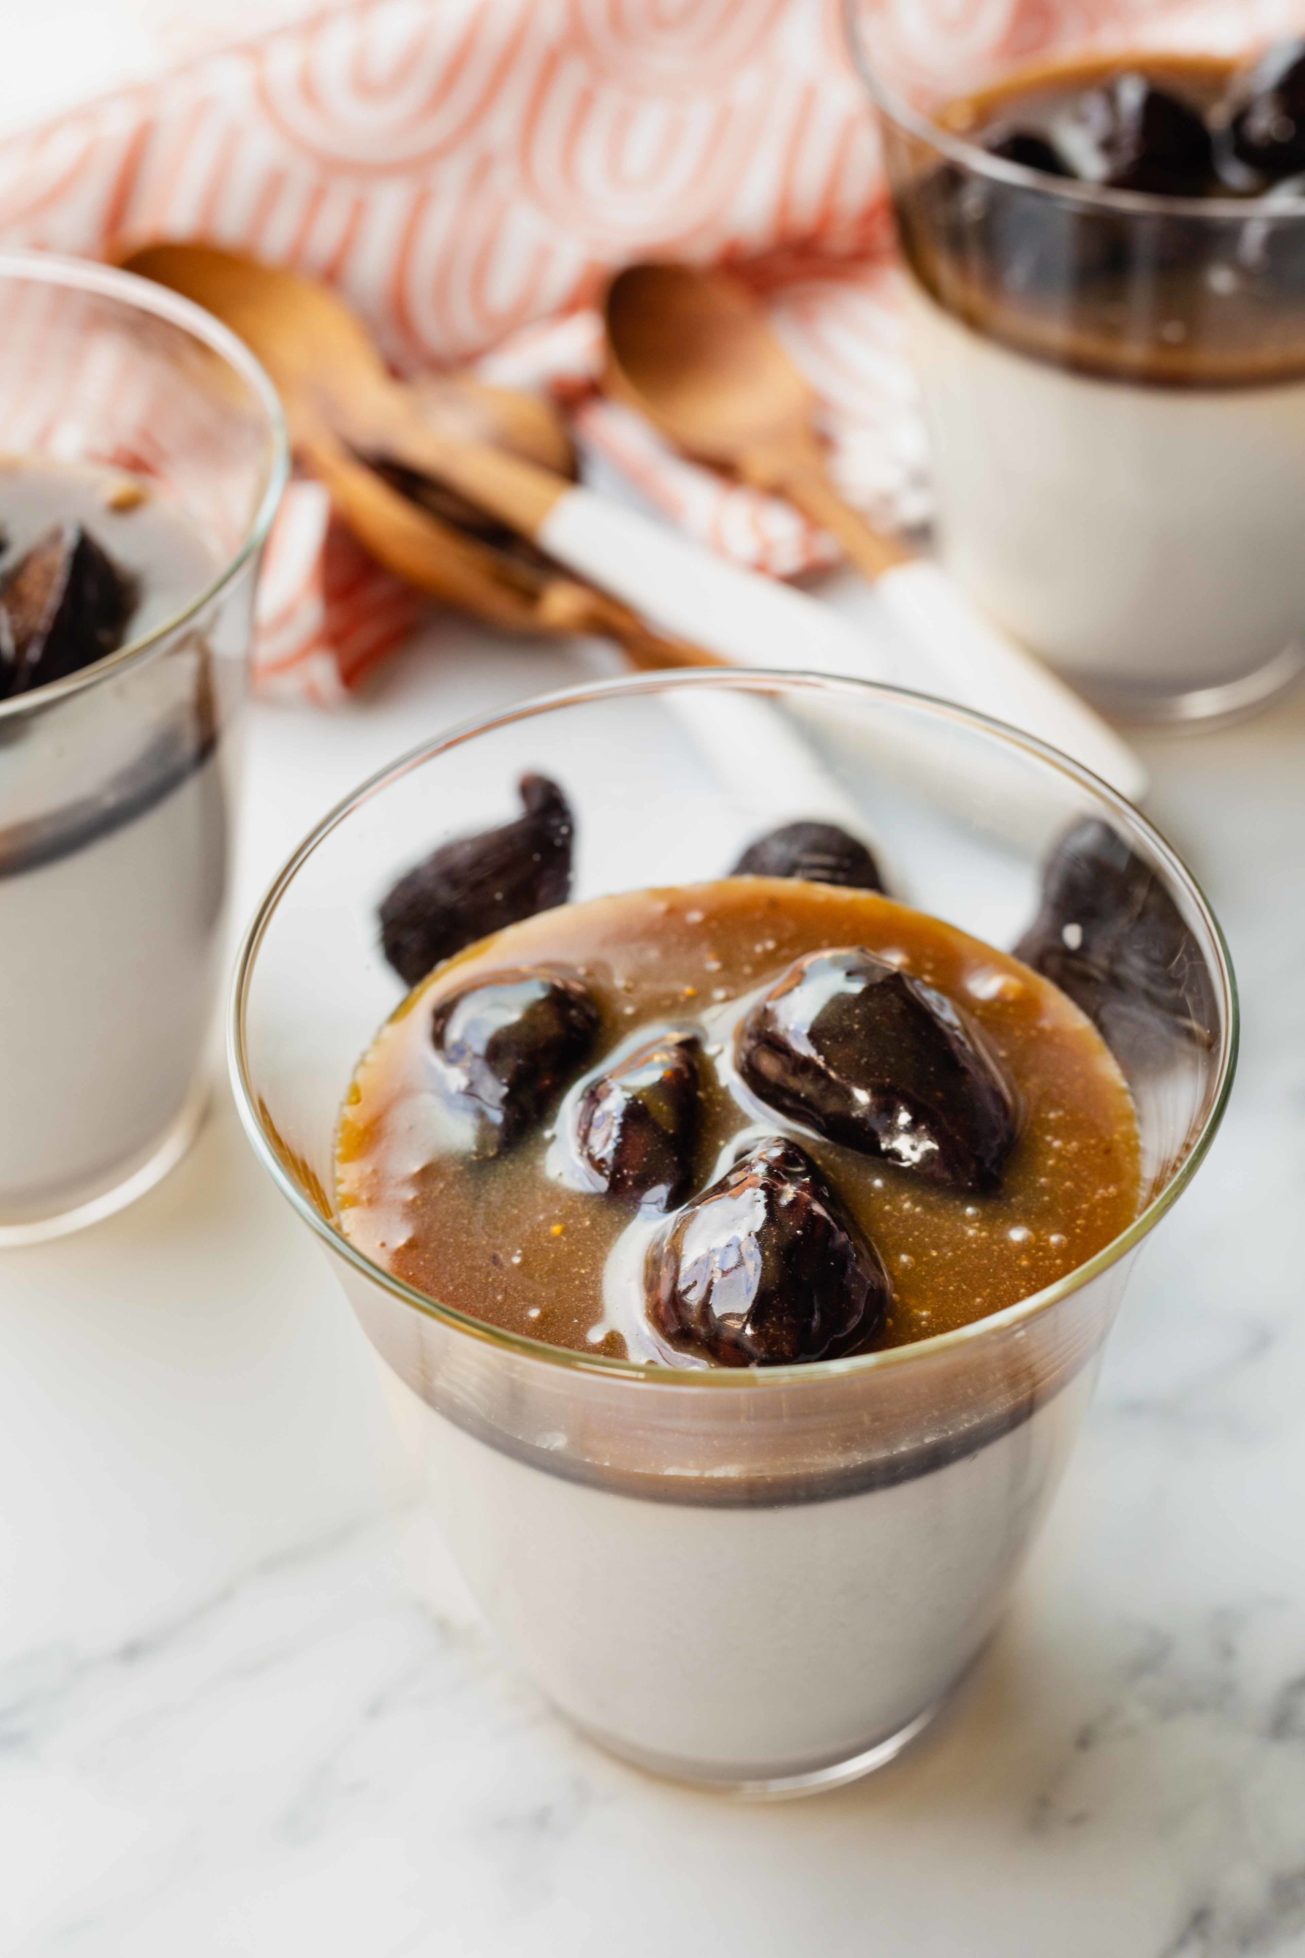 This recipe for panna cotta with figs and sweet cream is ready in an hour! Fig panna cotta is a good last minute dessert that's elegant.